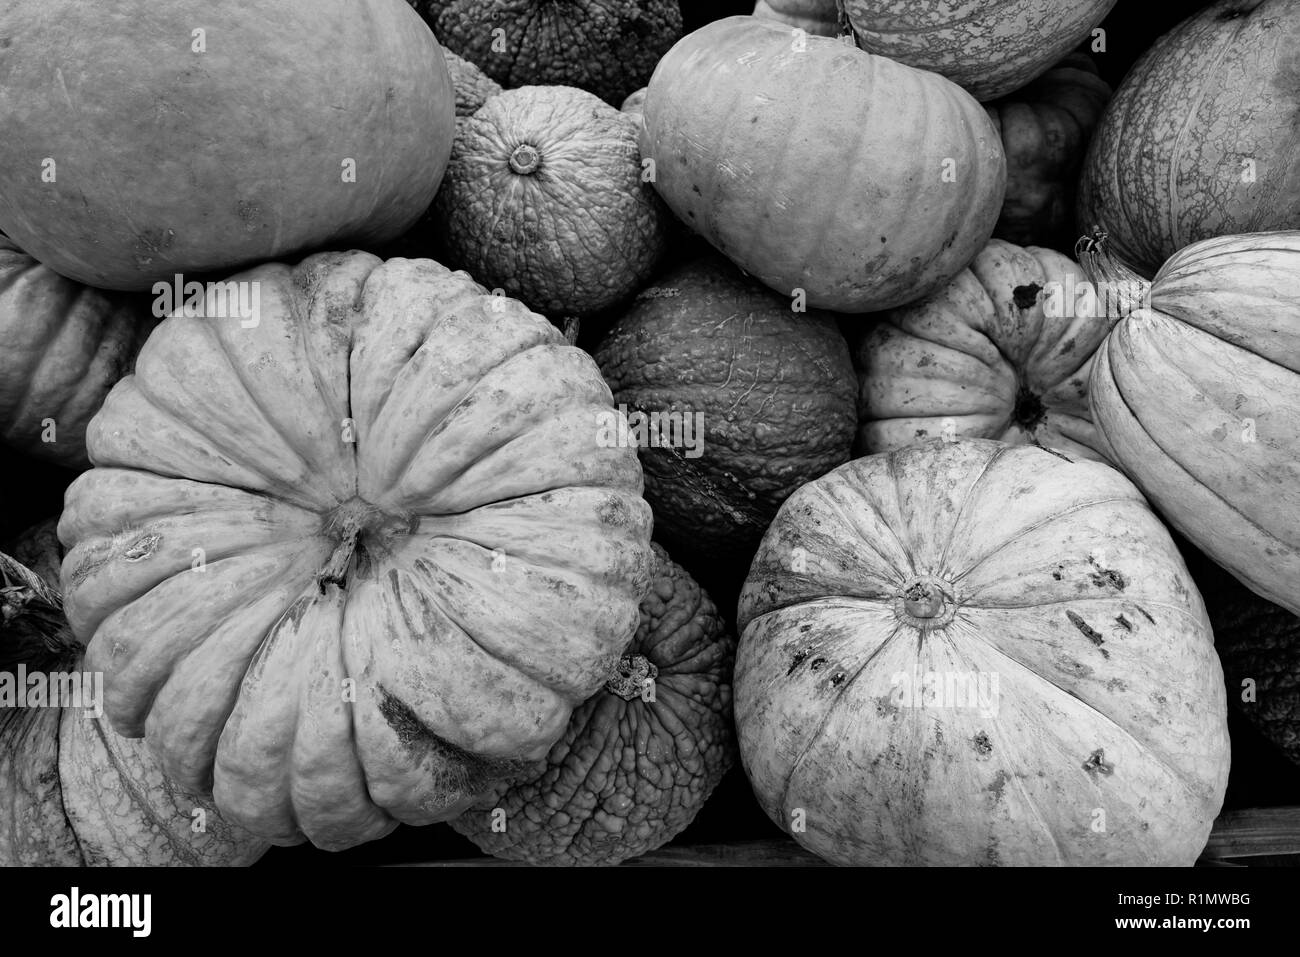 We know fall is here when displays full of Pumpkins and Gourds show up at the market Stock Photo